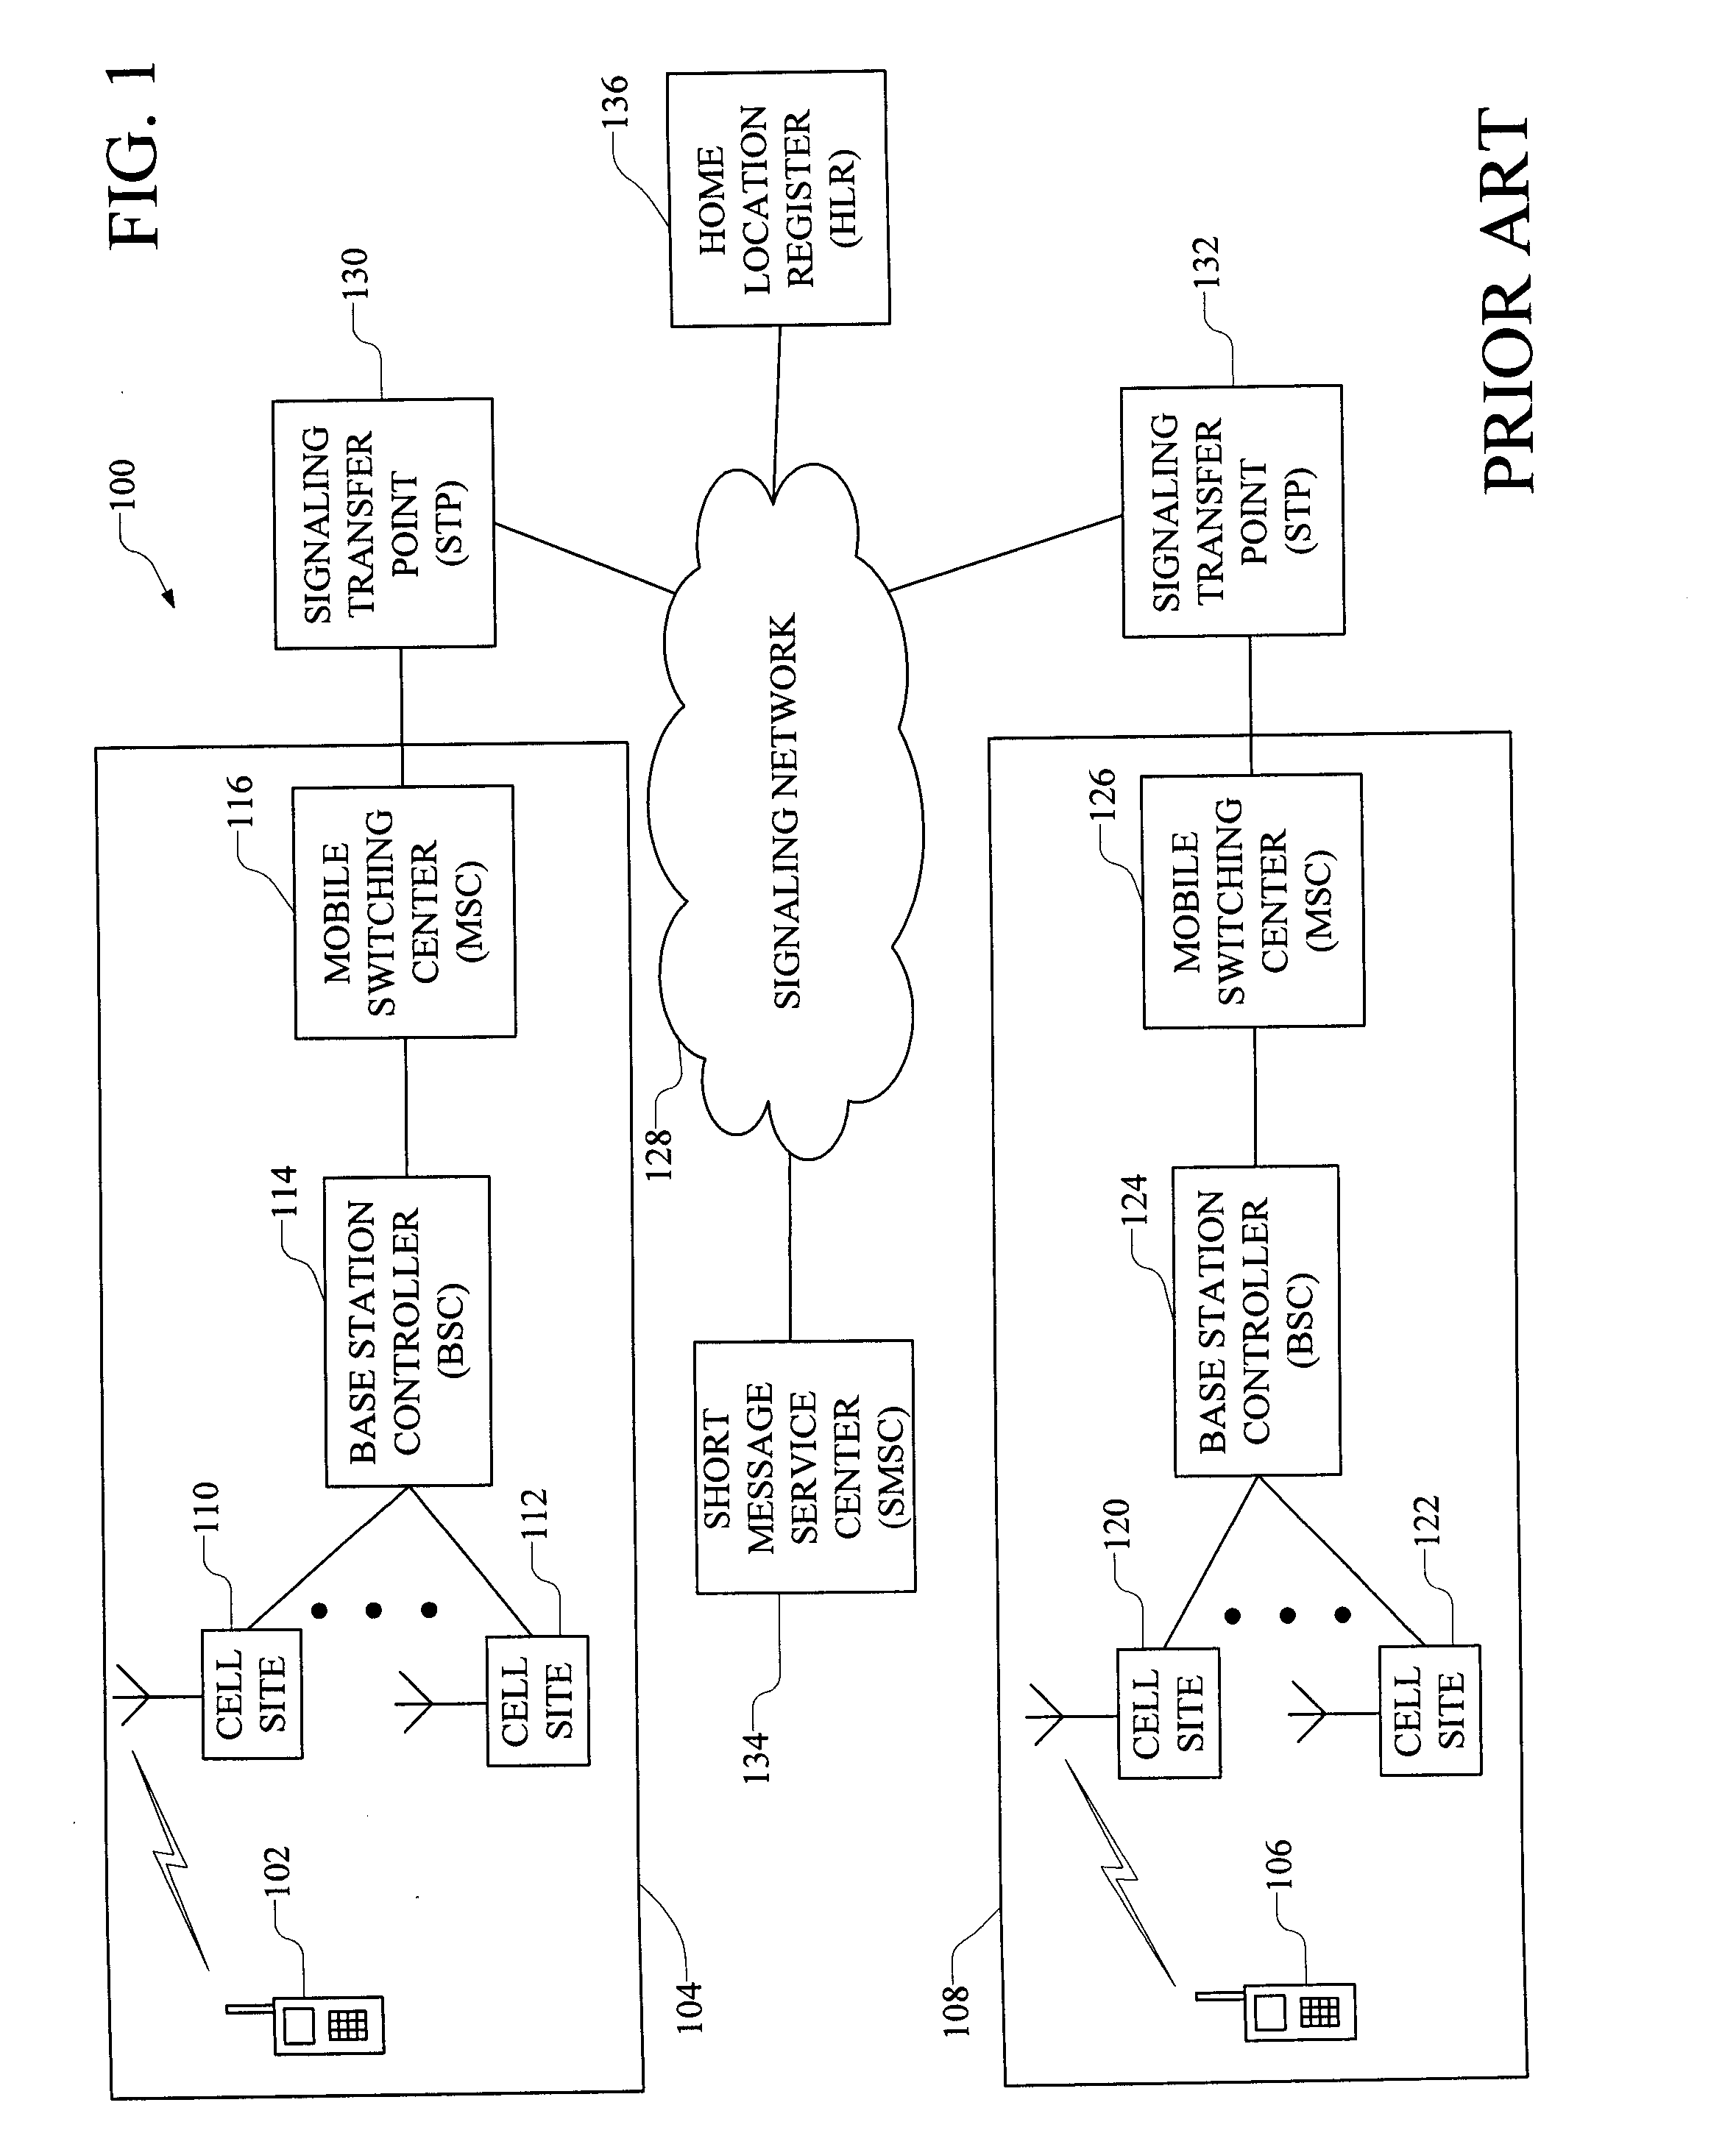 System and Method for Routing Short Message Service Special Number Messages to Local Special Number Answering Points